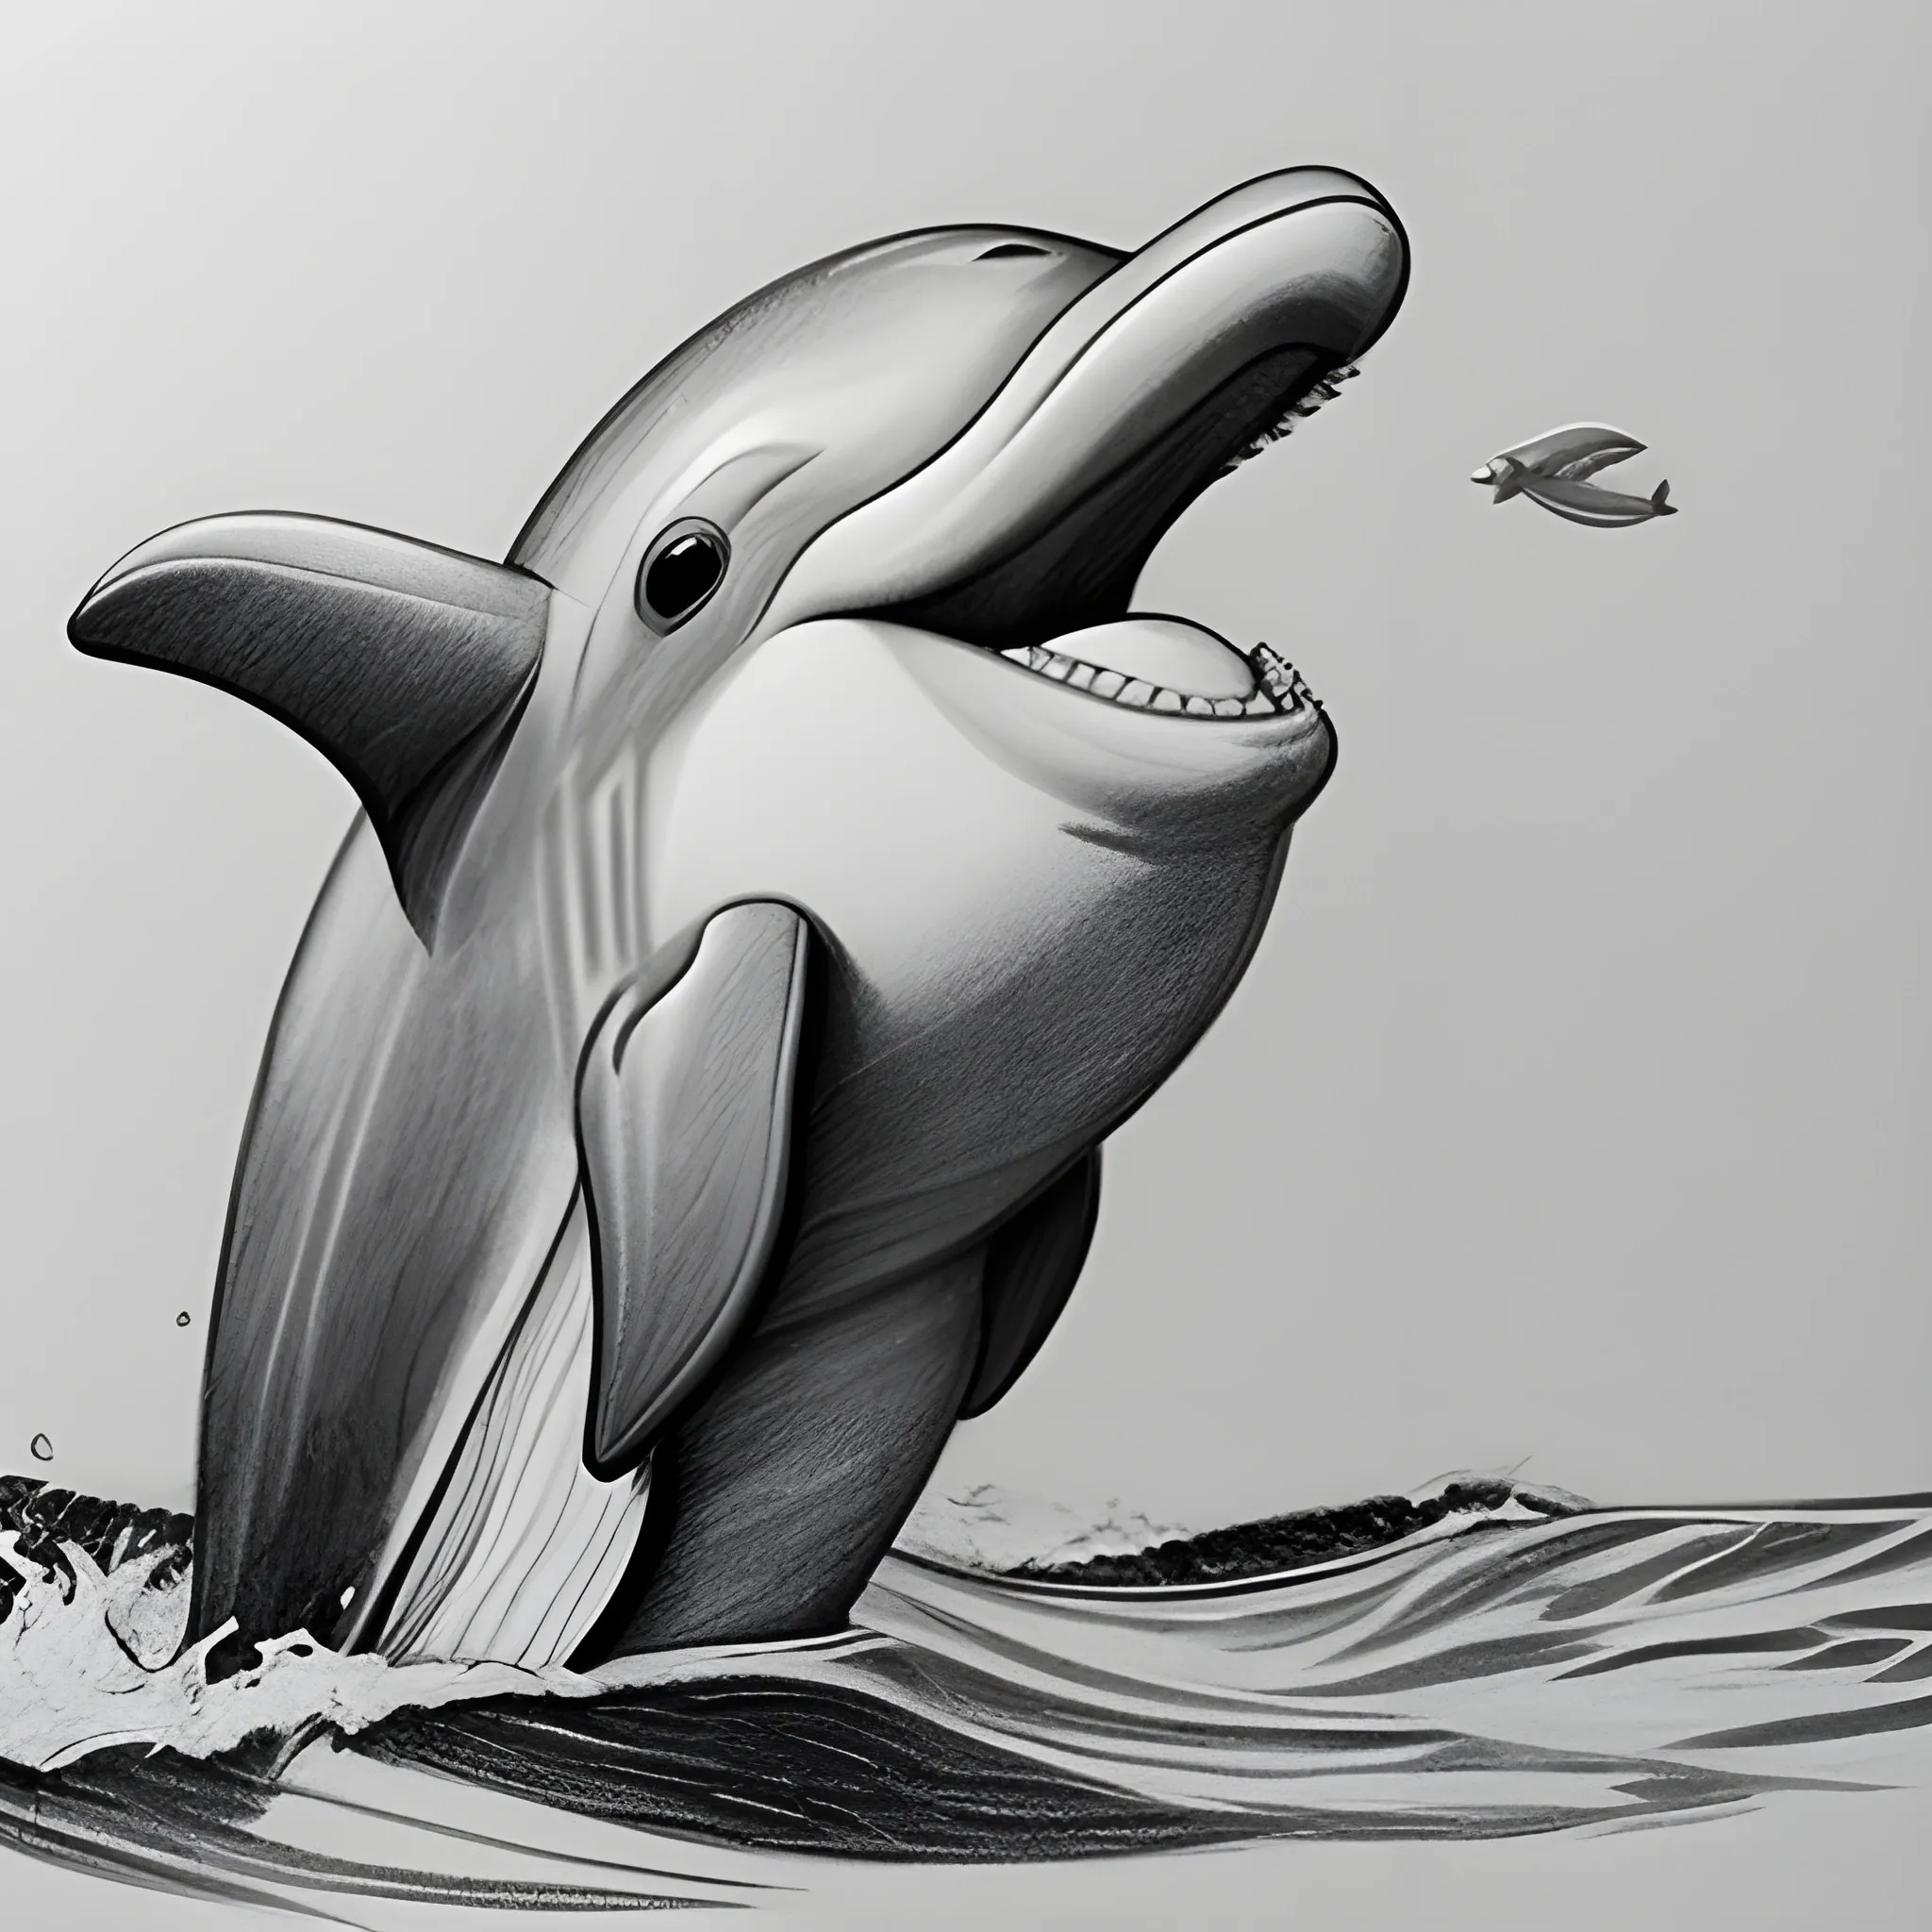 3dRose db_10697_1 Bottlenose Dolphin-Drawing Book, 8 by 8-Inch : Amazon.in:  Office Products